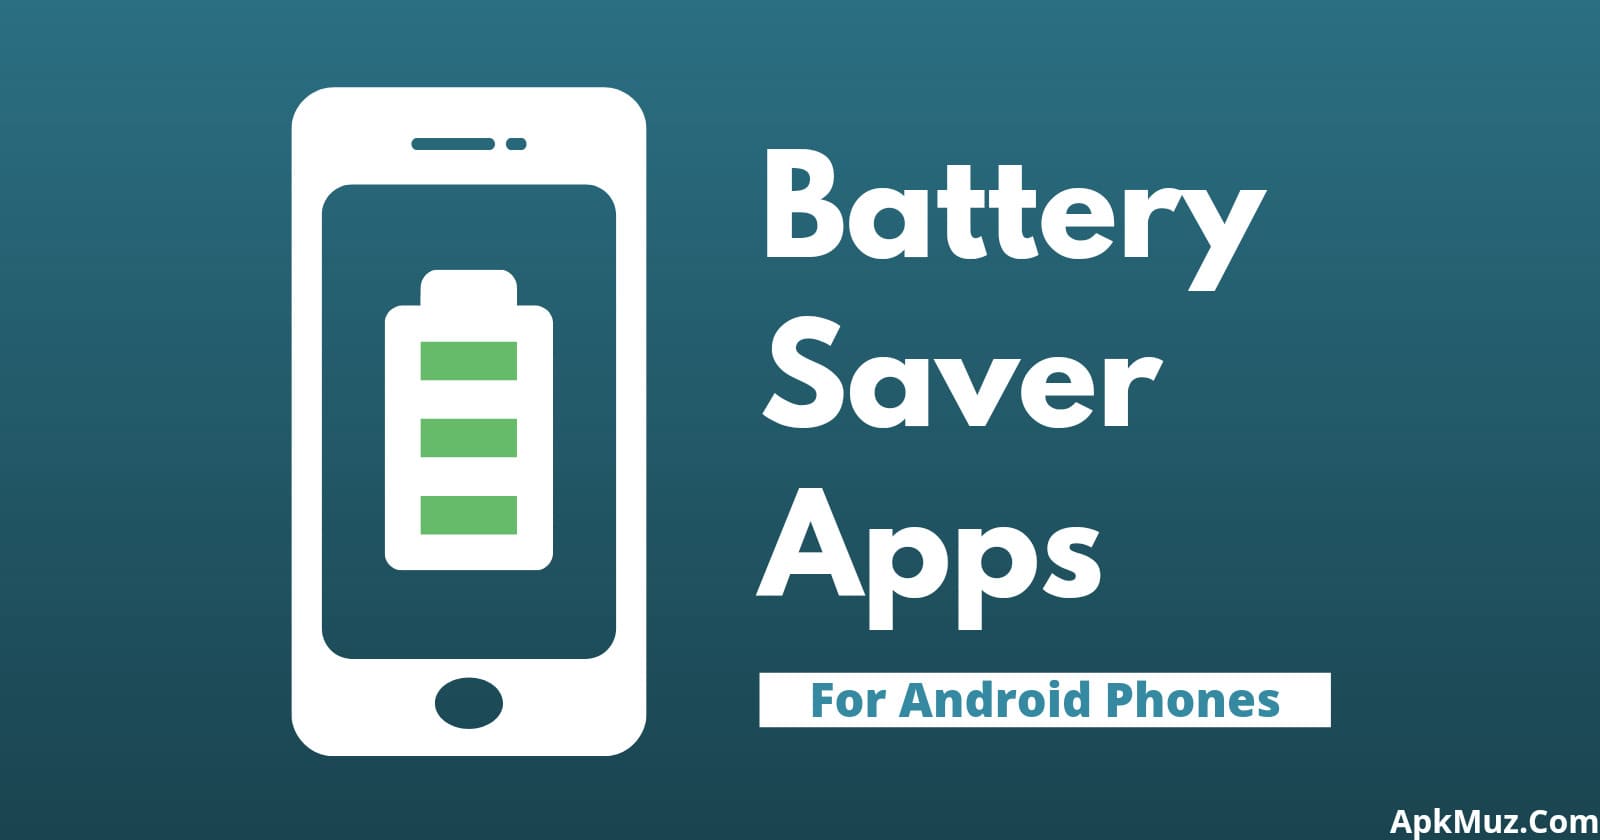 Battery Saver Apps for Android